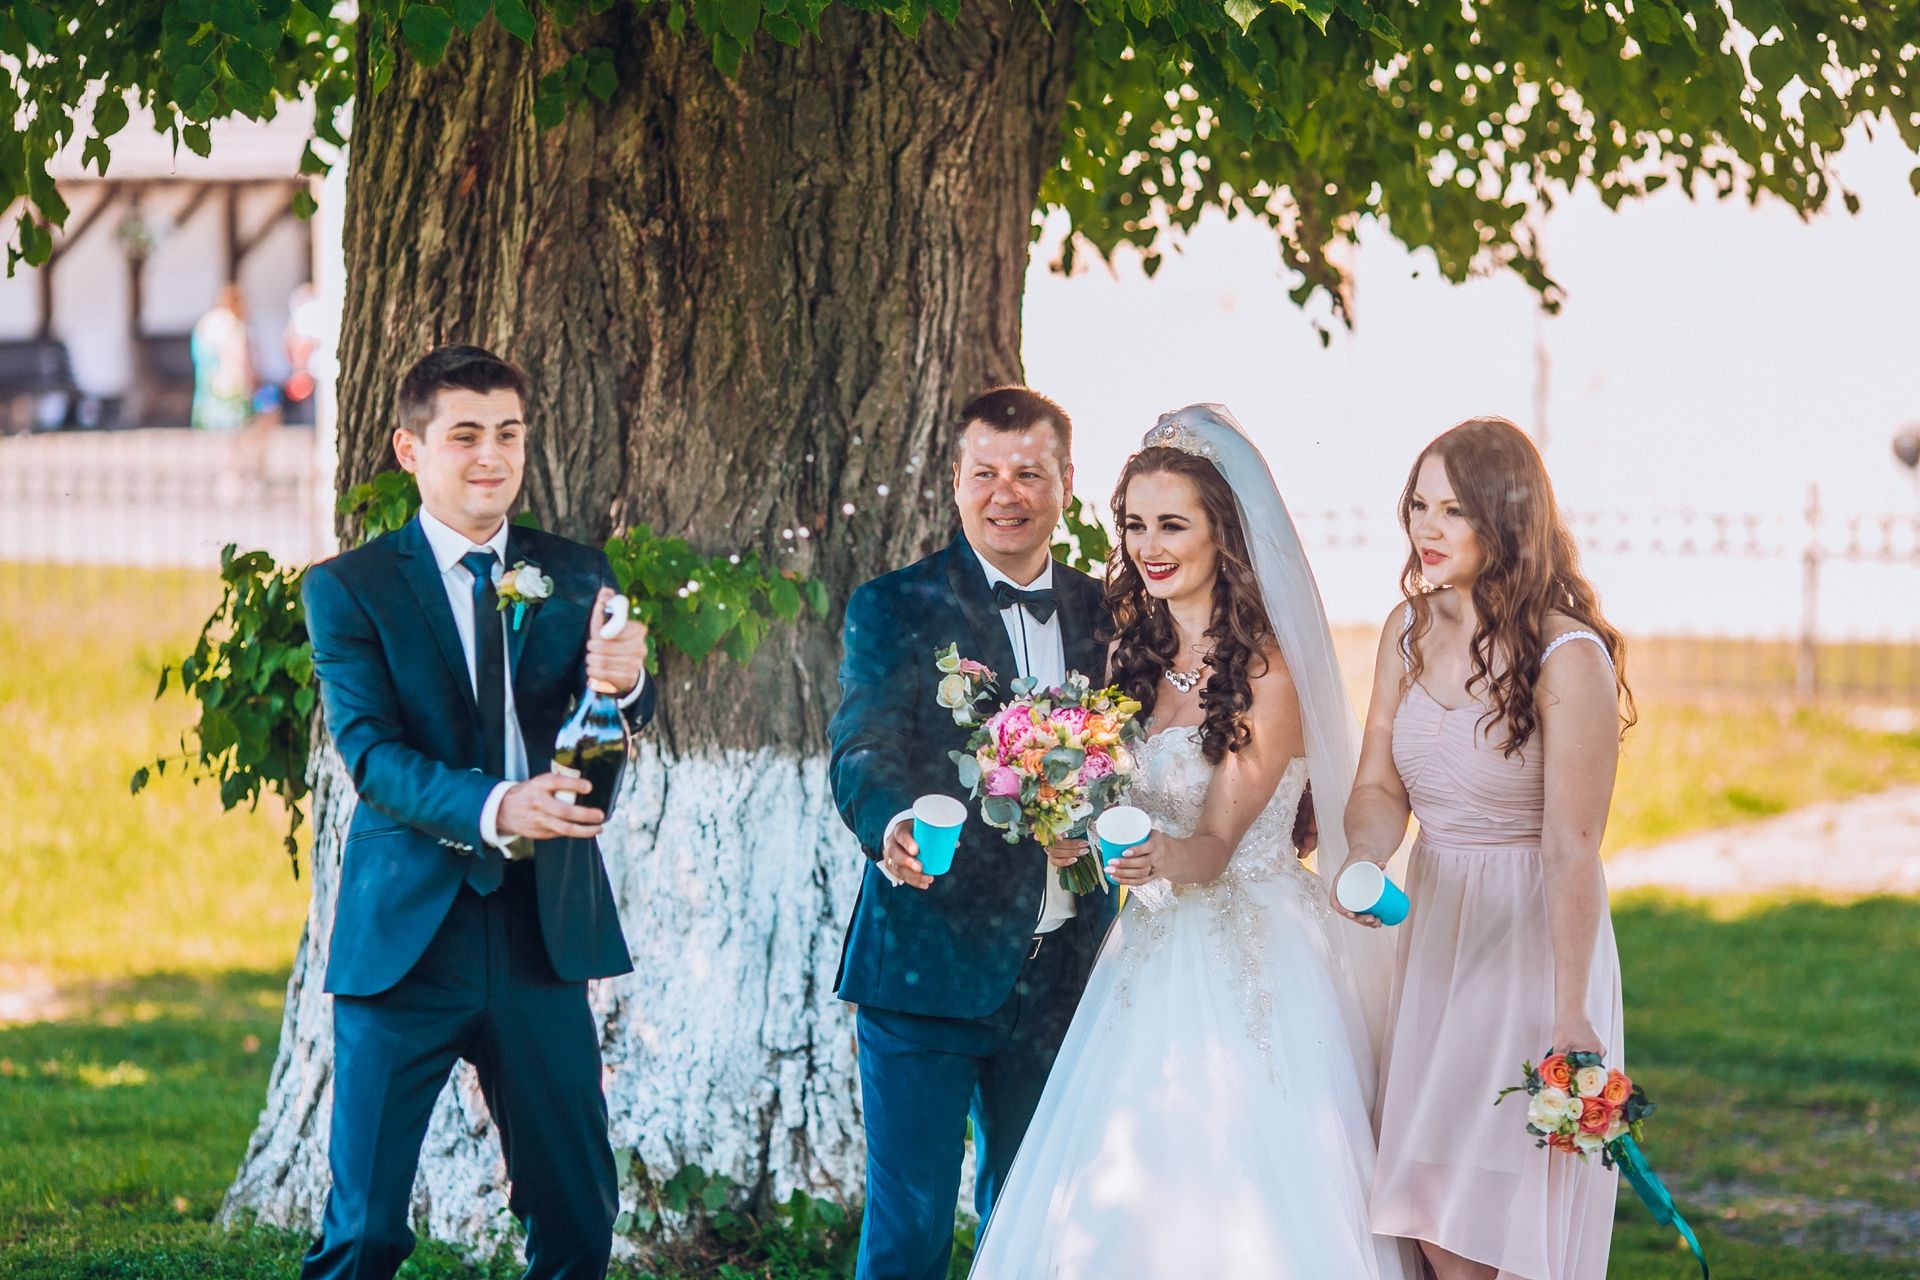 Newlyweds and their friends open champagne bottle standing in the park. Before wedding ceremony friends having fun and drink champagne. Funny wedding moment of newlyweds and bridesmaids and groomsmen.